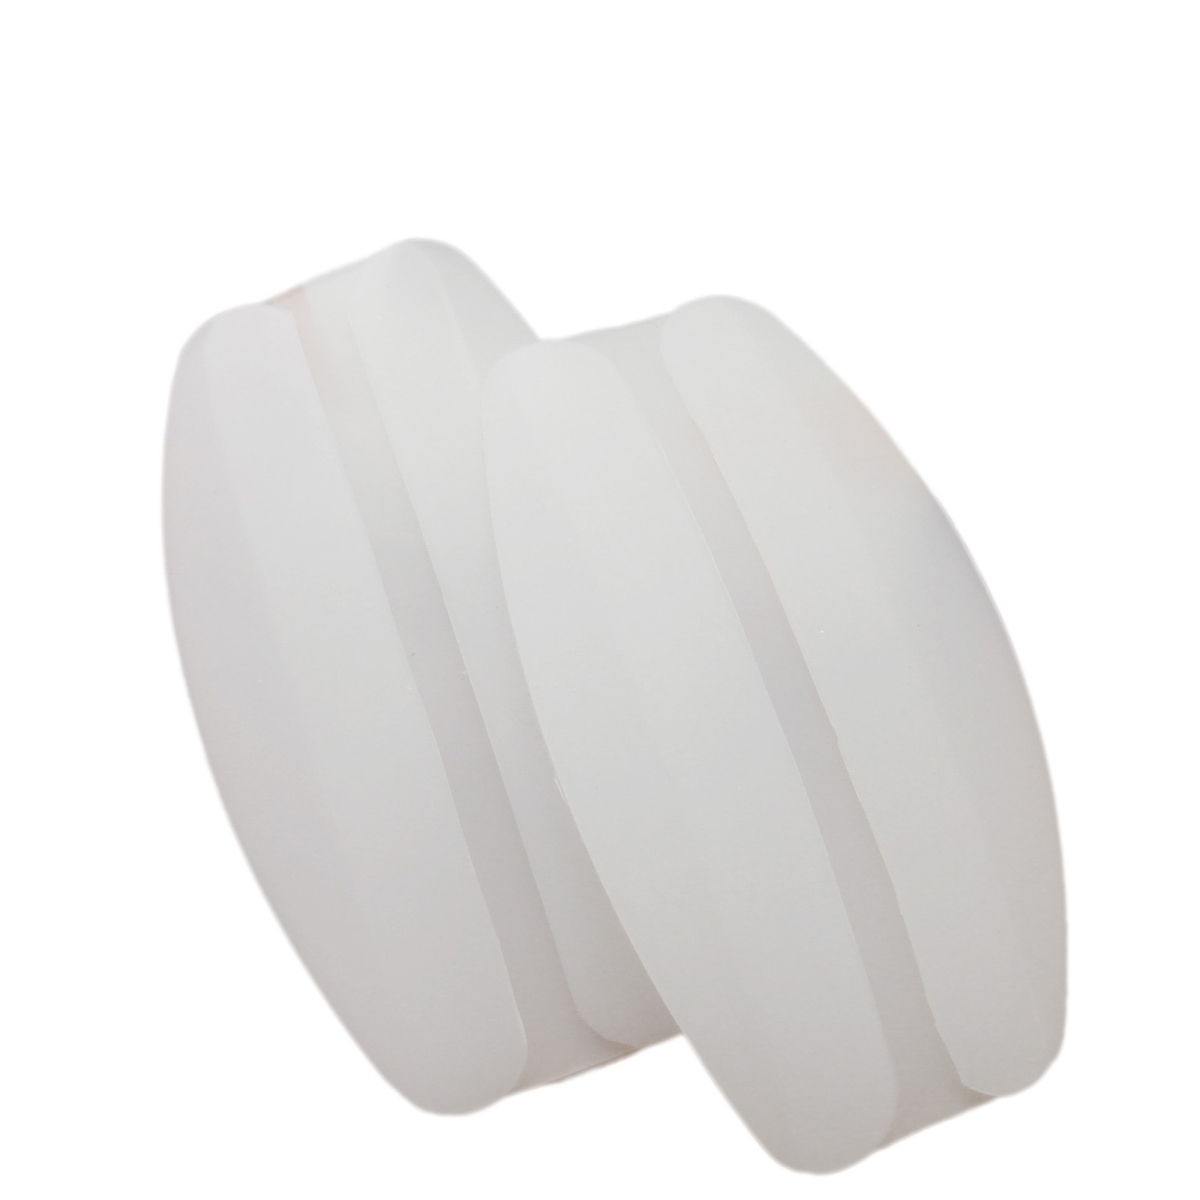 92600-white Soft Silicone Bra Strap Cushion For Ease Shoulder Discomfort - White